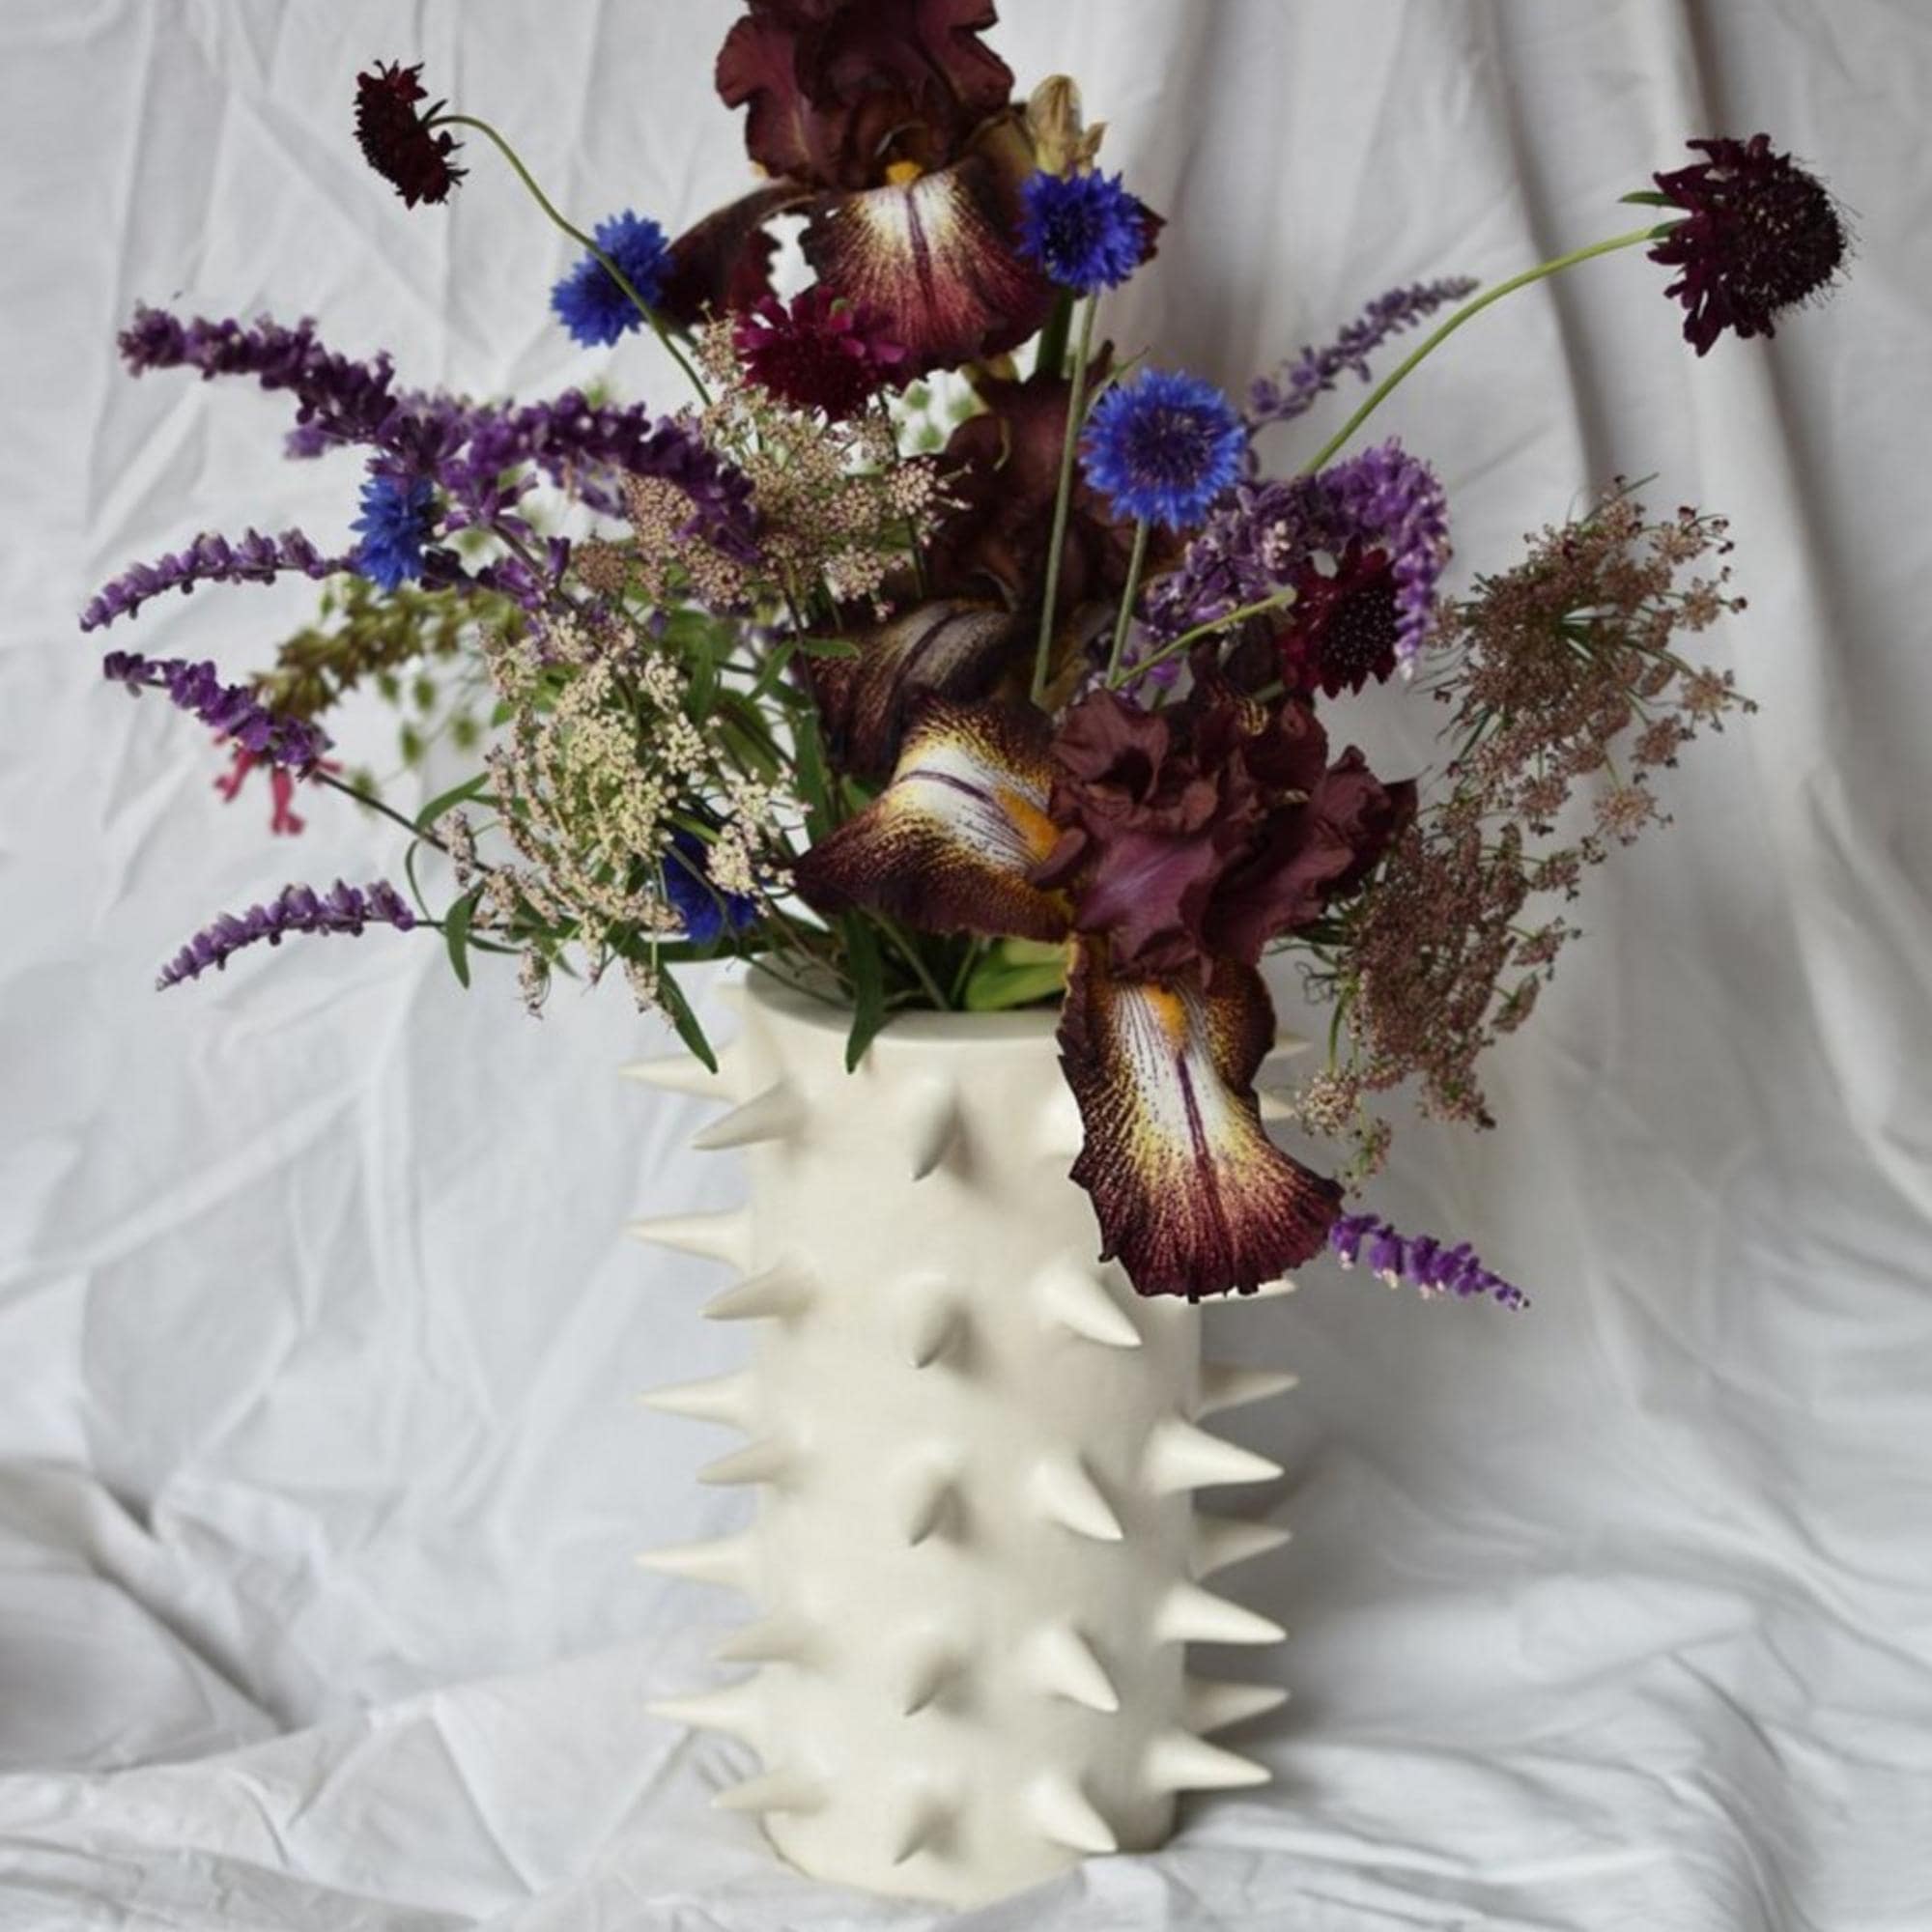 Spikes Vase IV - THAT COOL LIVING